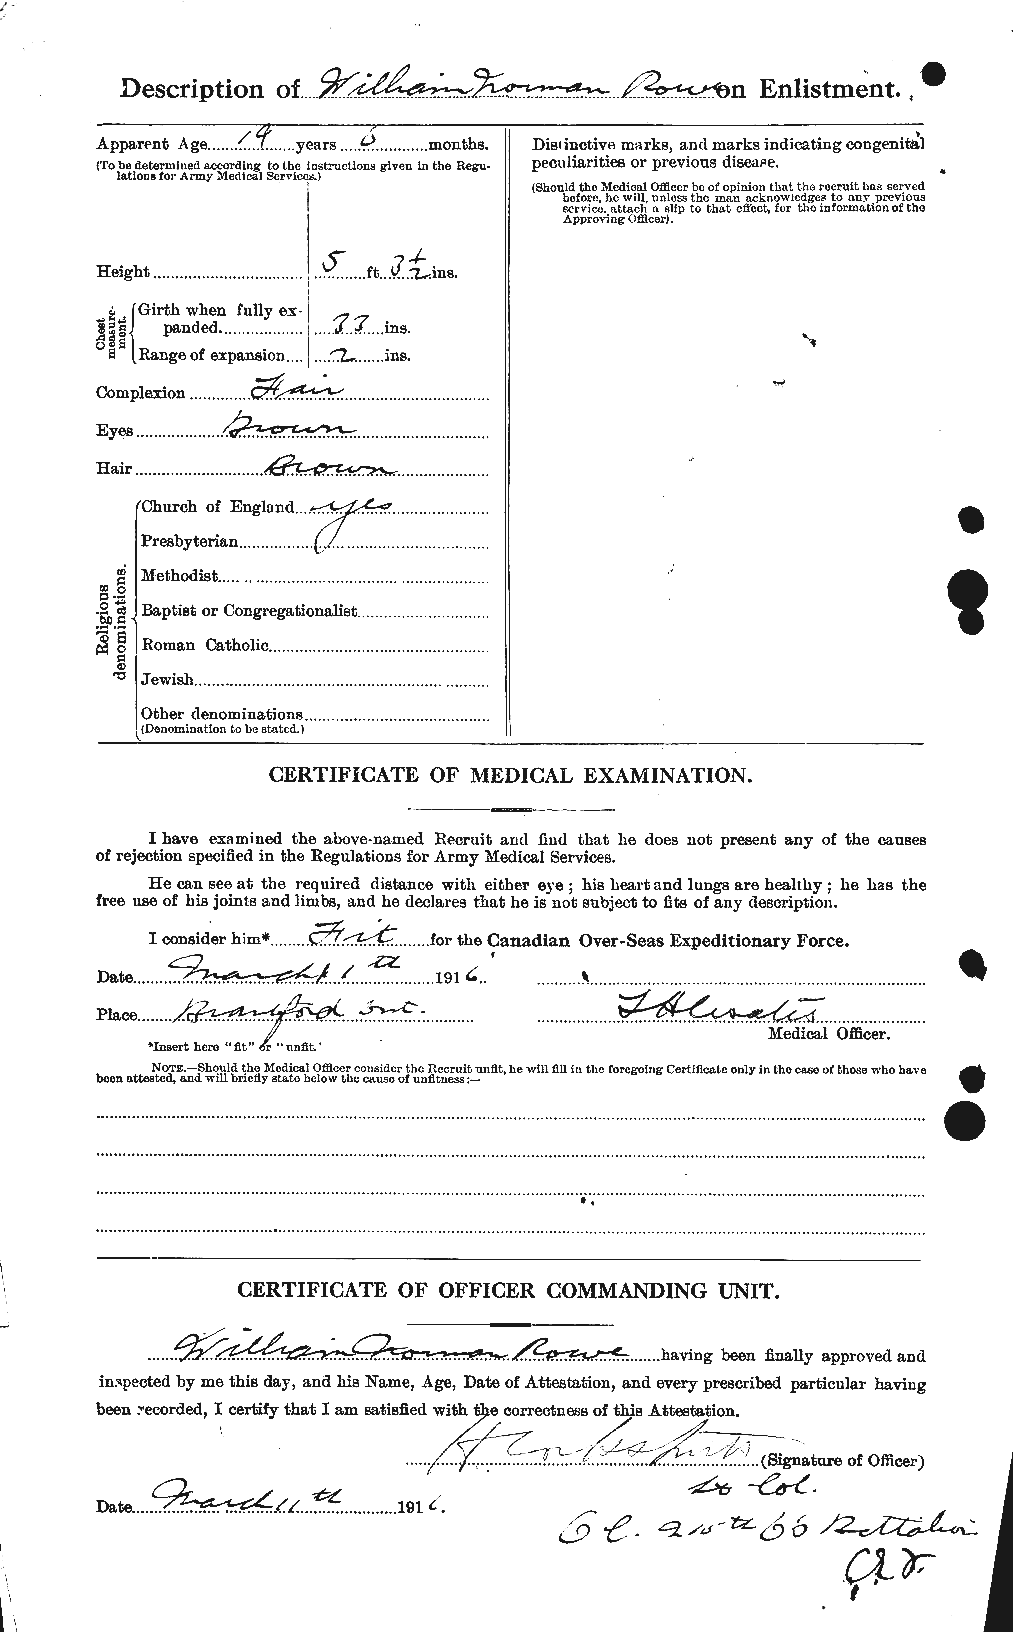 Personnel Records of the First World War - CEF 616041b